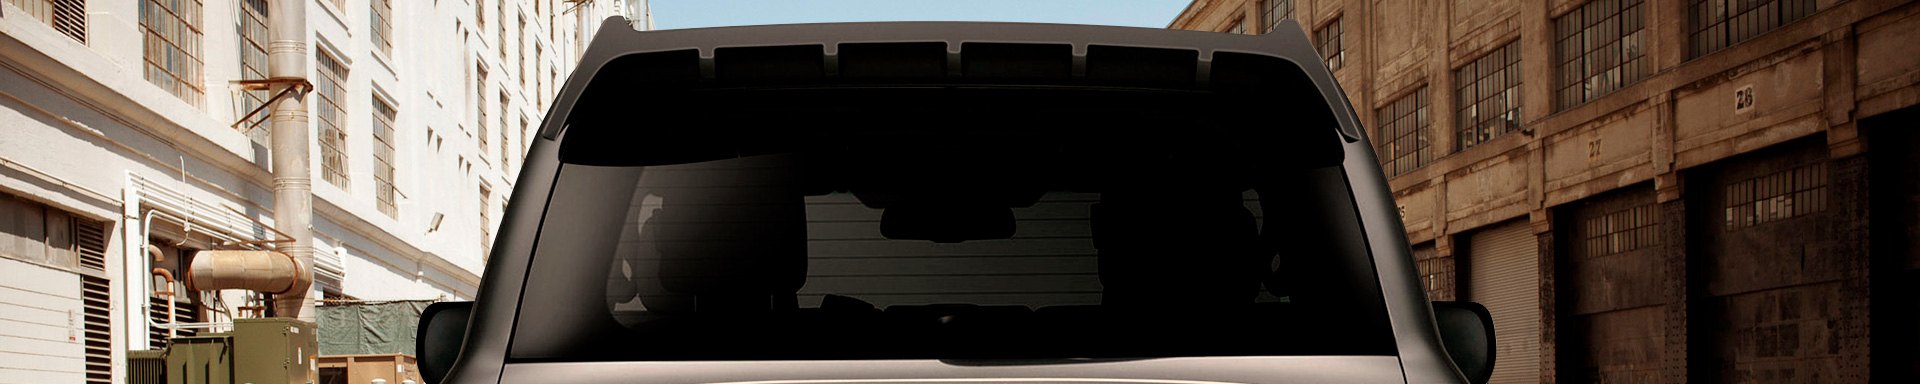 Duraflex Rear Roof and Trunk Lid Spoilers for Toyota Land Cruiser LC200